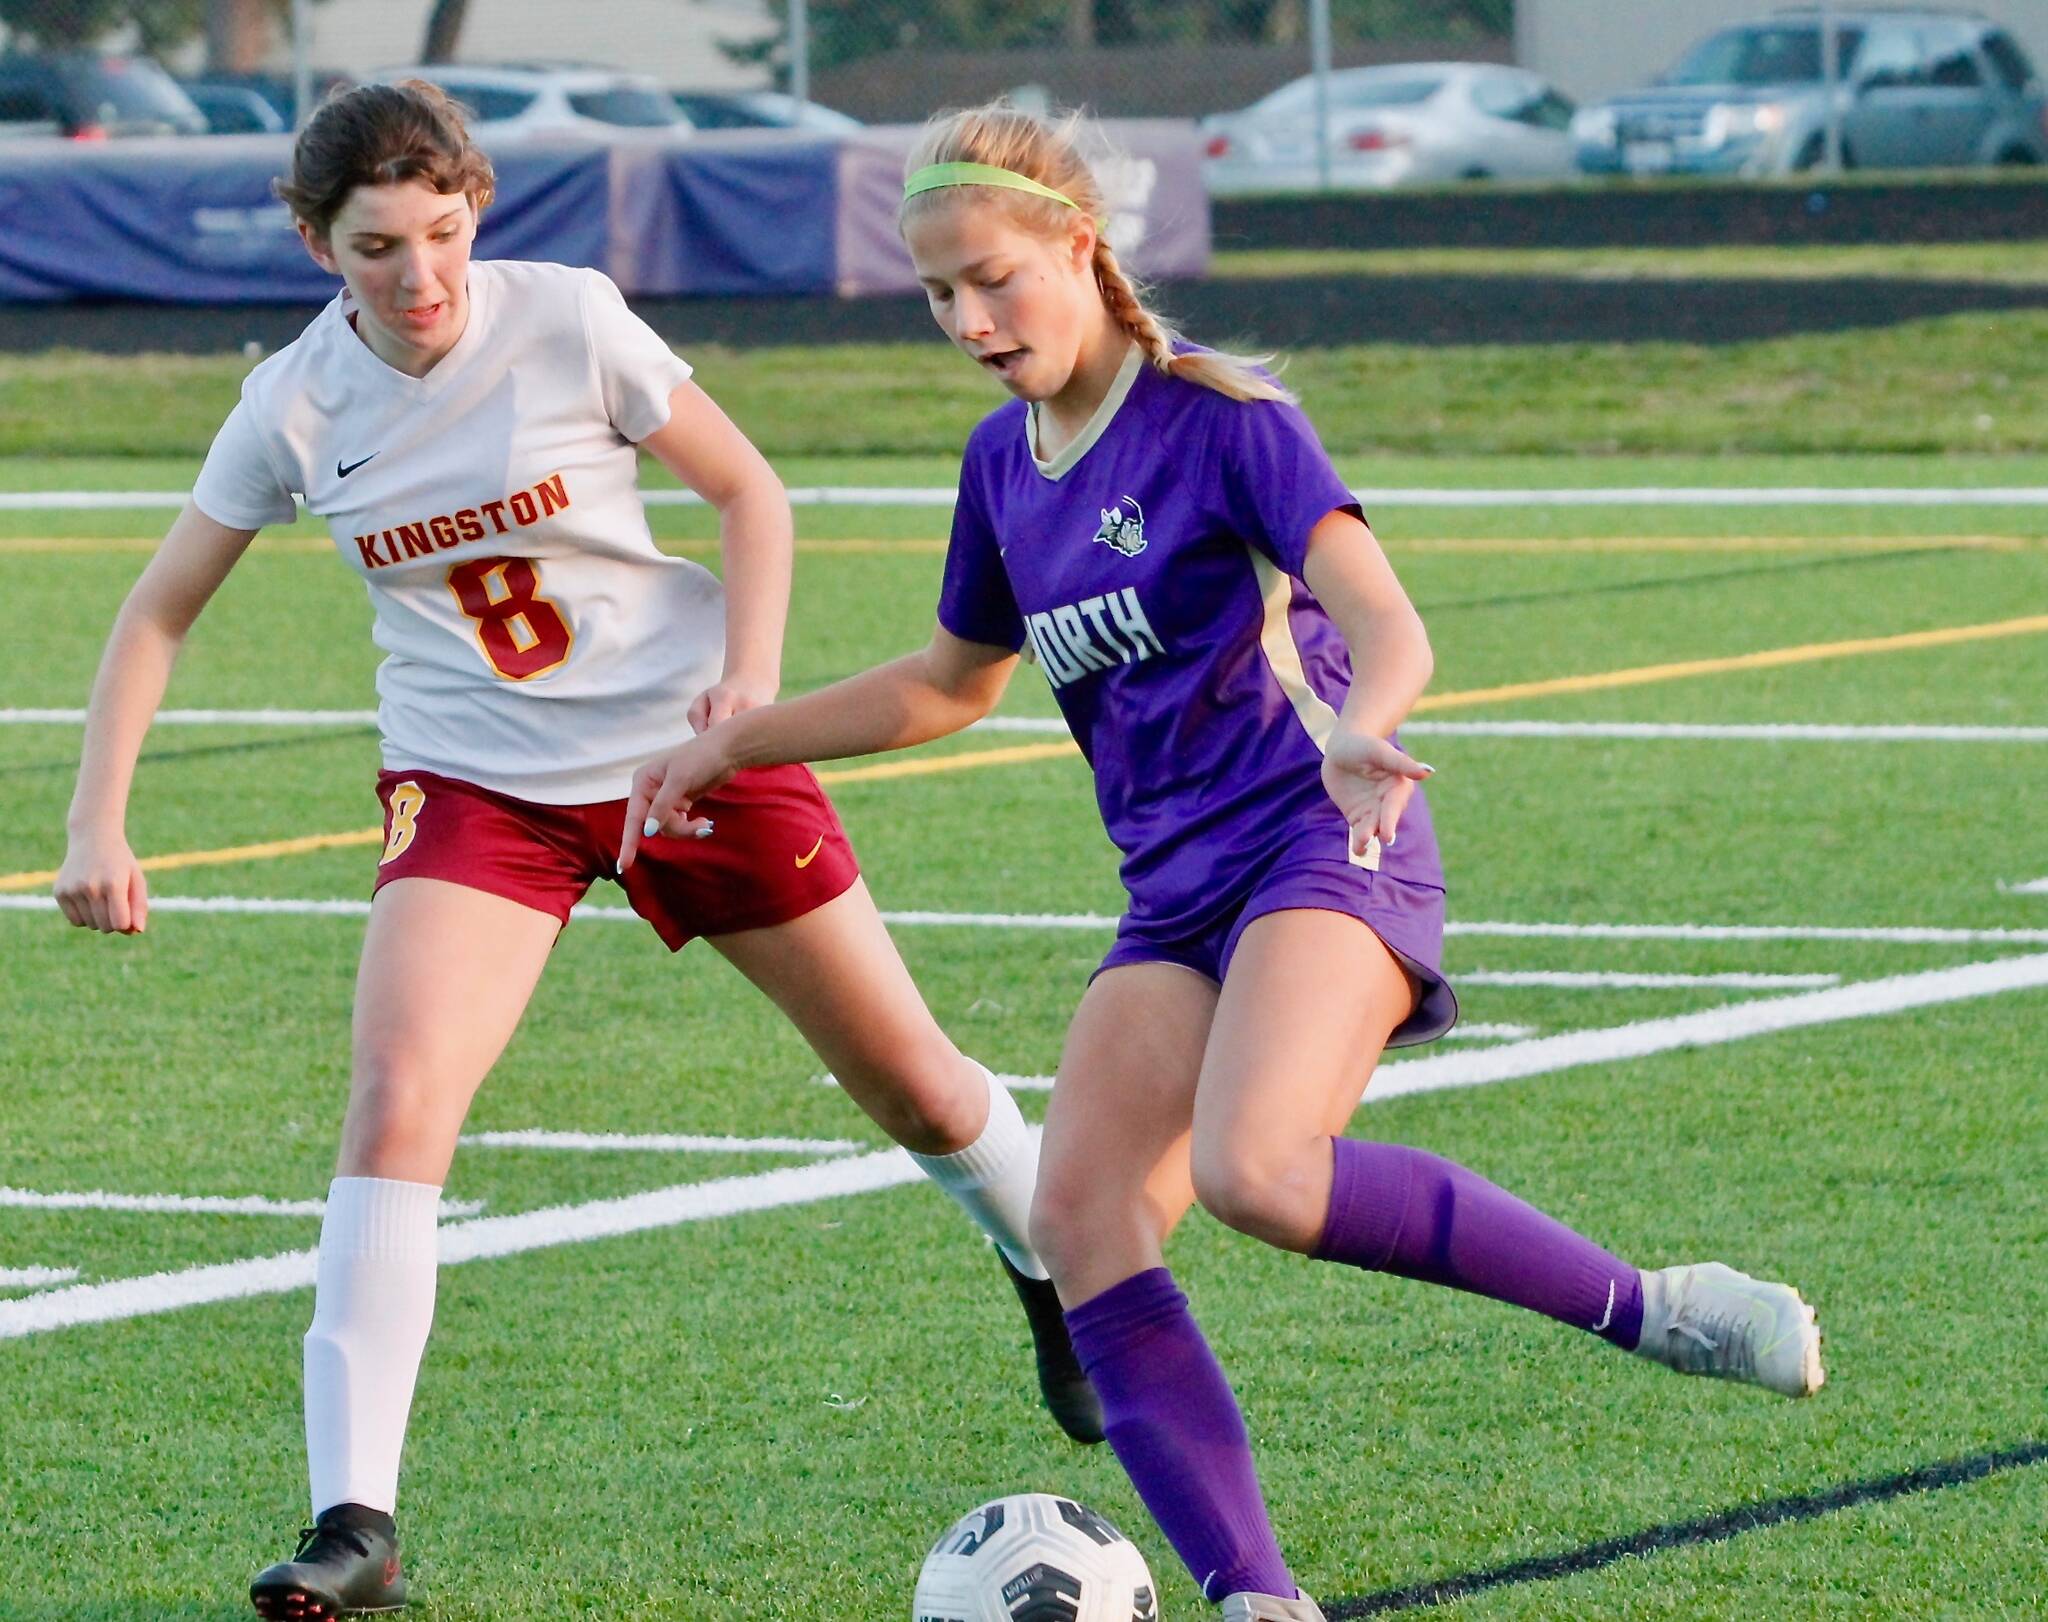 Evelyn Beers looks to make a pass back to the middle of the field as she’s defended by Kingston’s Genevieve Upton. (Mark Krulish/Kitsap News Group)